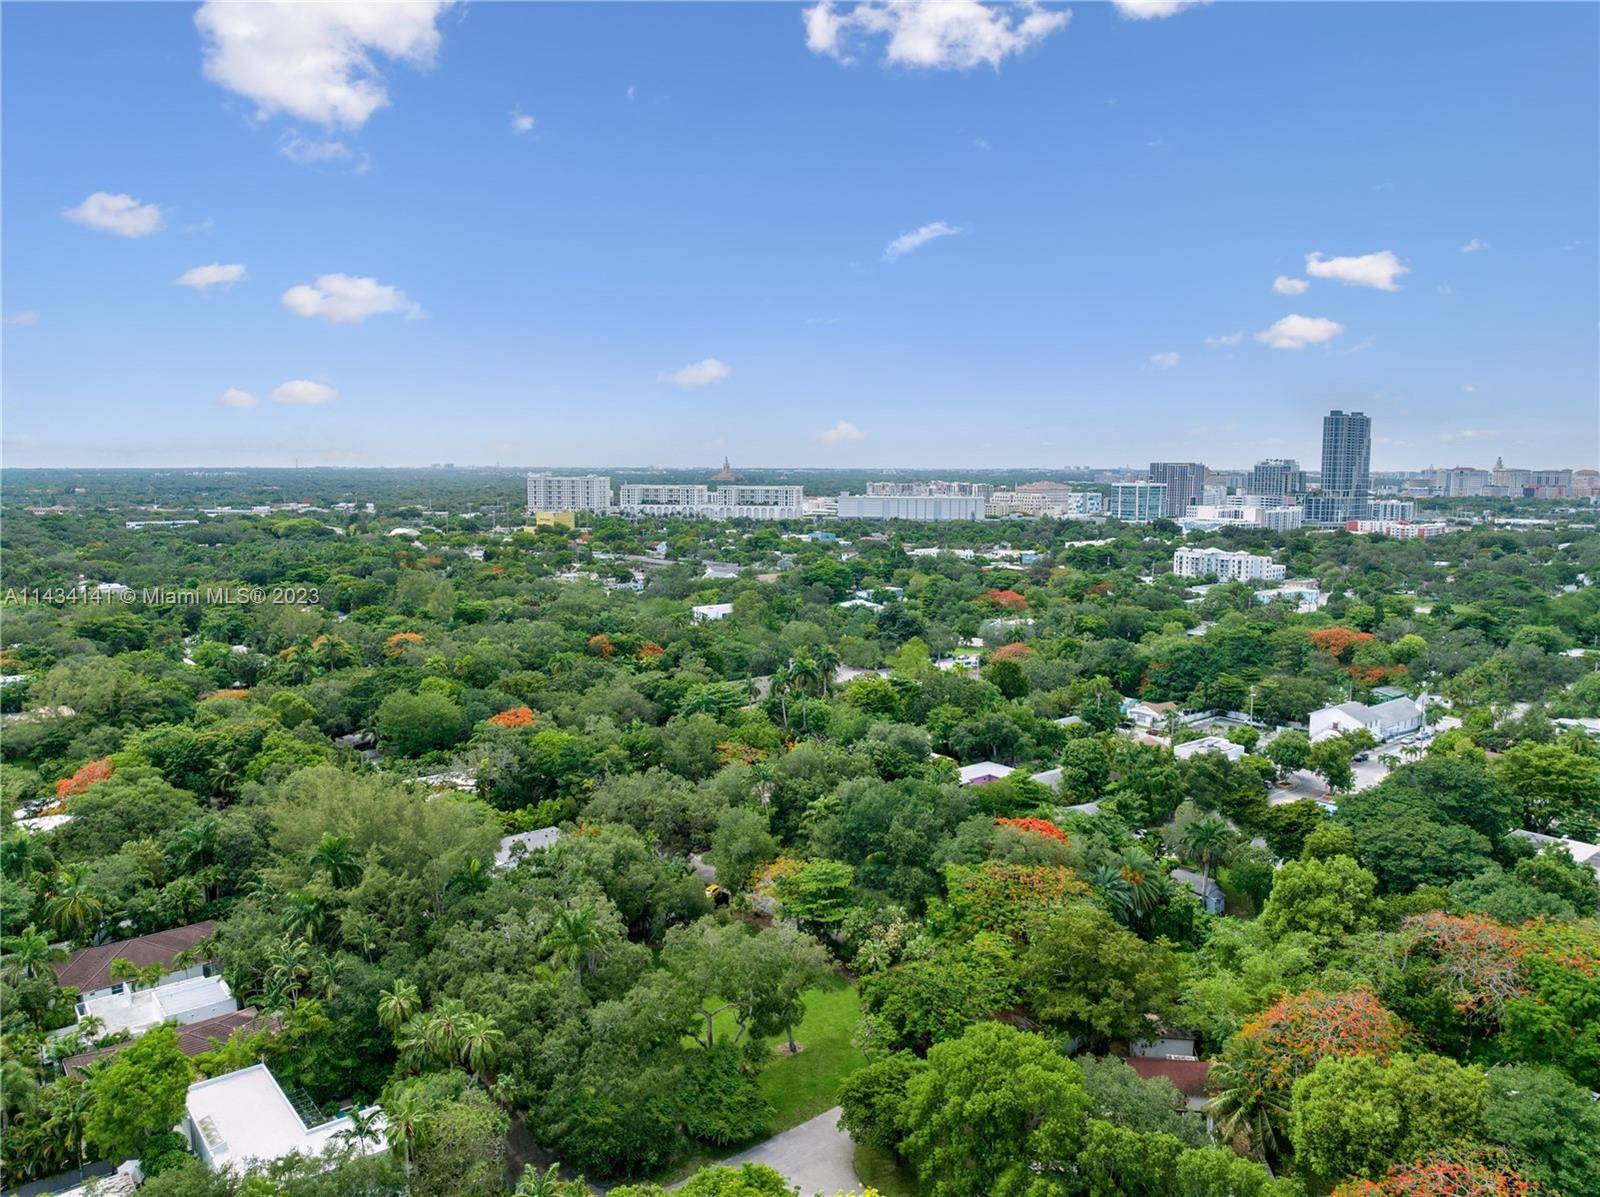 Unique opportunity to own a 21, 000 sq ft lot in the heart of sought after Coconut Grove !